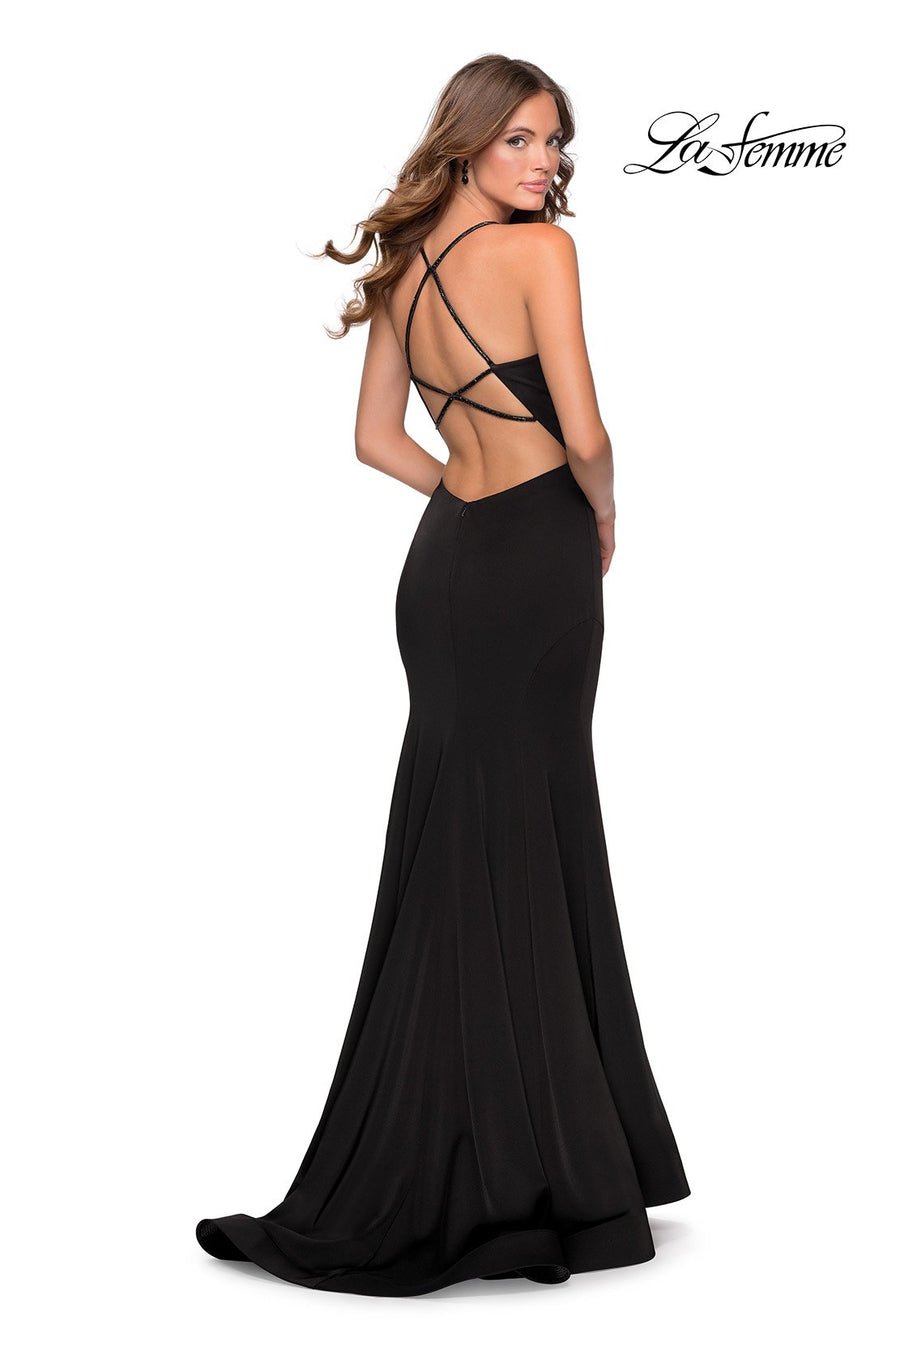 La Femme 28526 prom dress images.  La Femme 28526 is available in these colors: Black, Deep Red, Electric Blue, Peach.